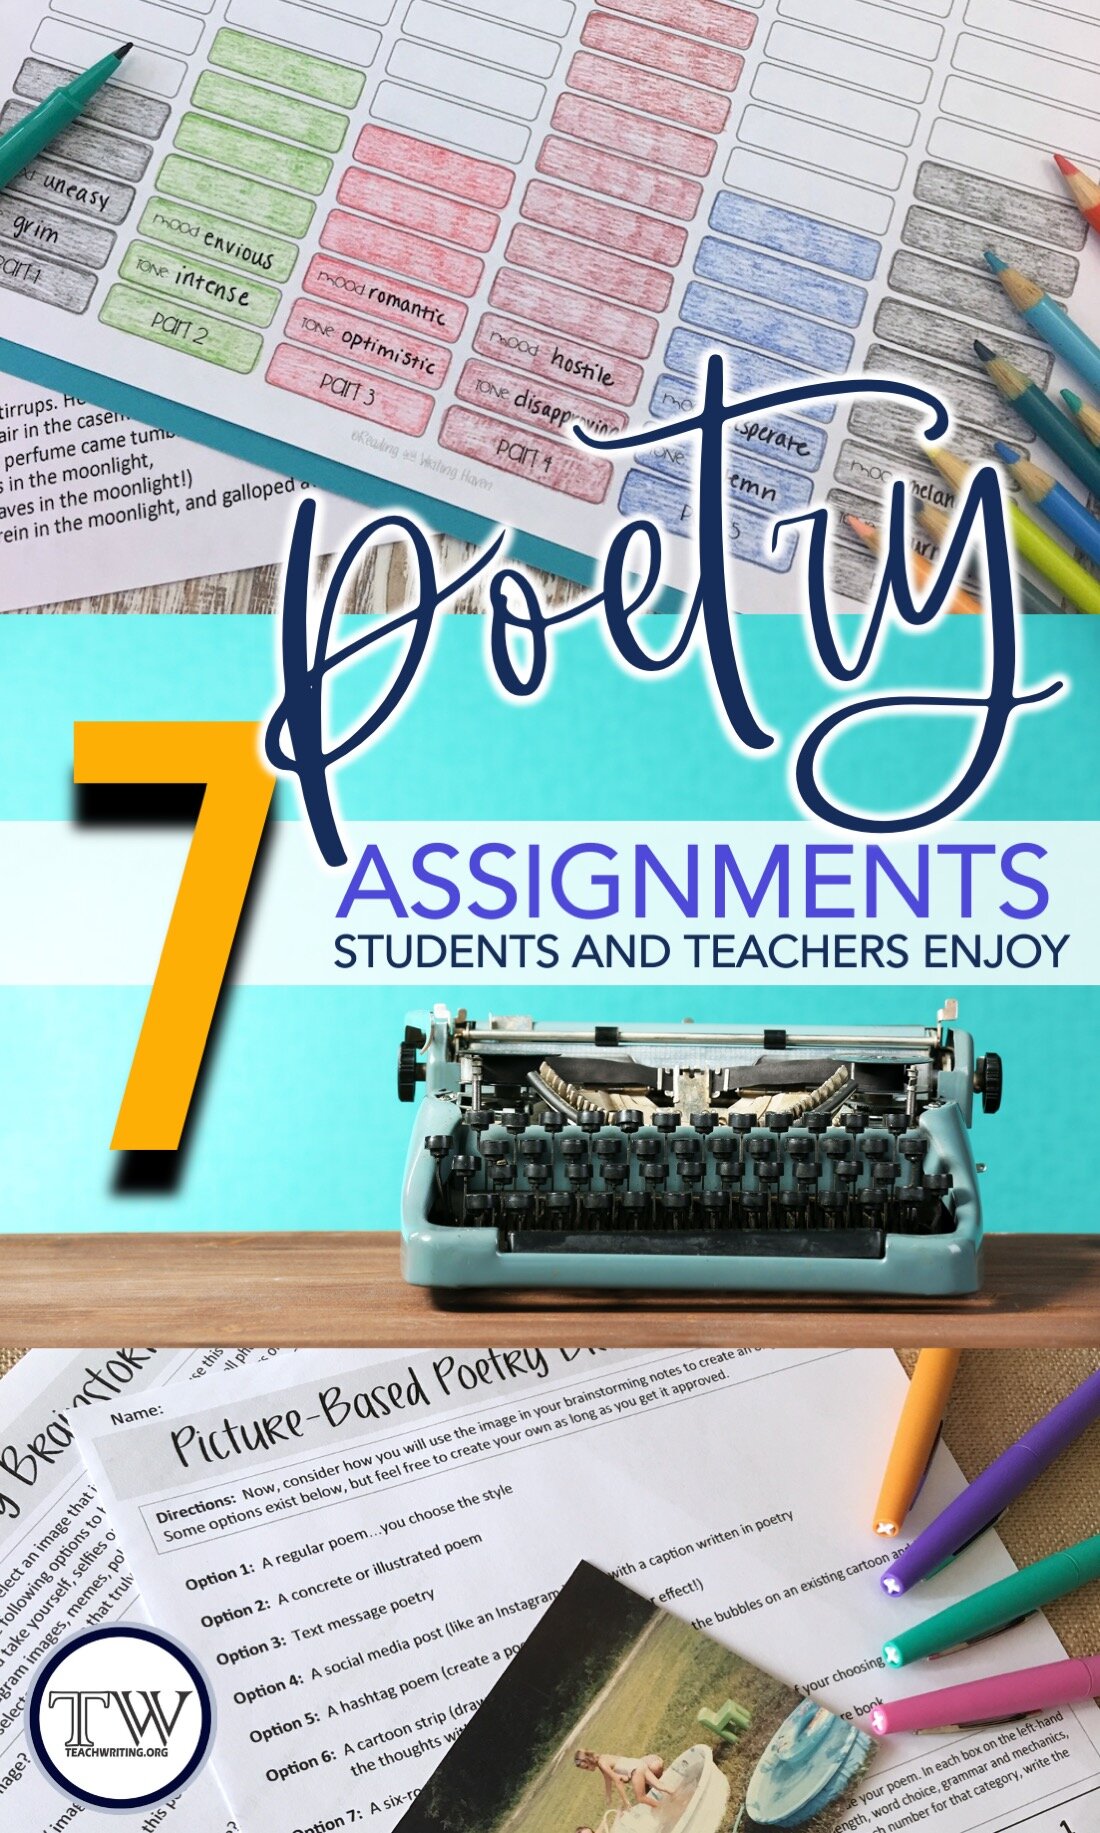 Engaging, fun poetry assignments for middle and high school ELA #TeachingPoetry #MiddleSchoolELA #HighSchoolELA